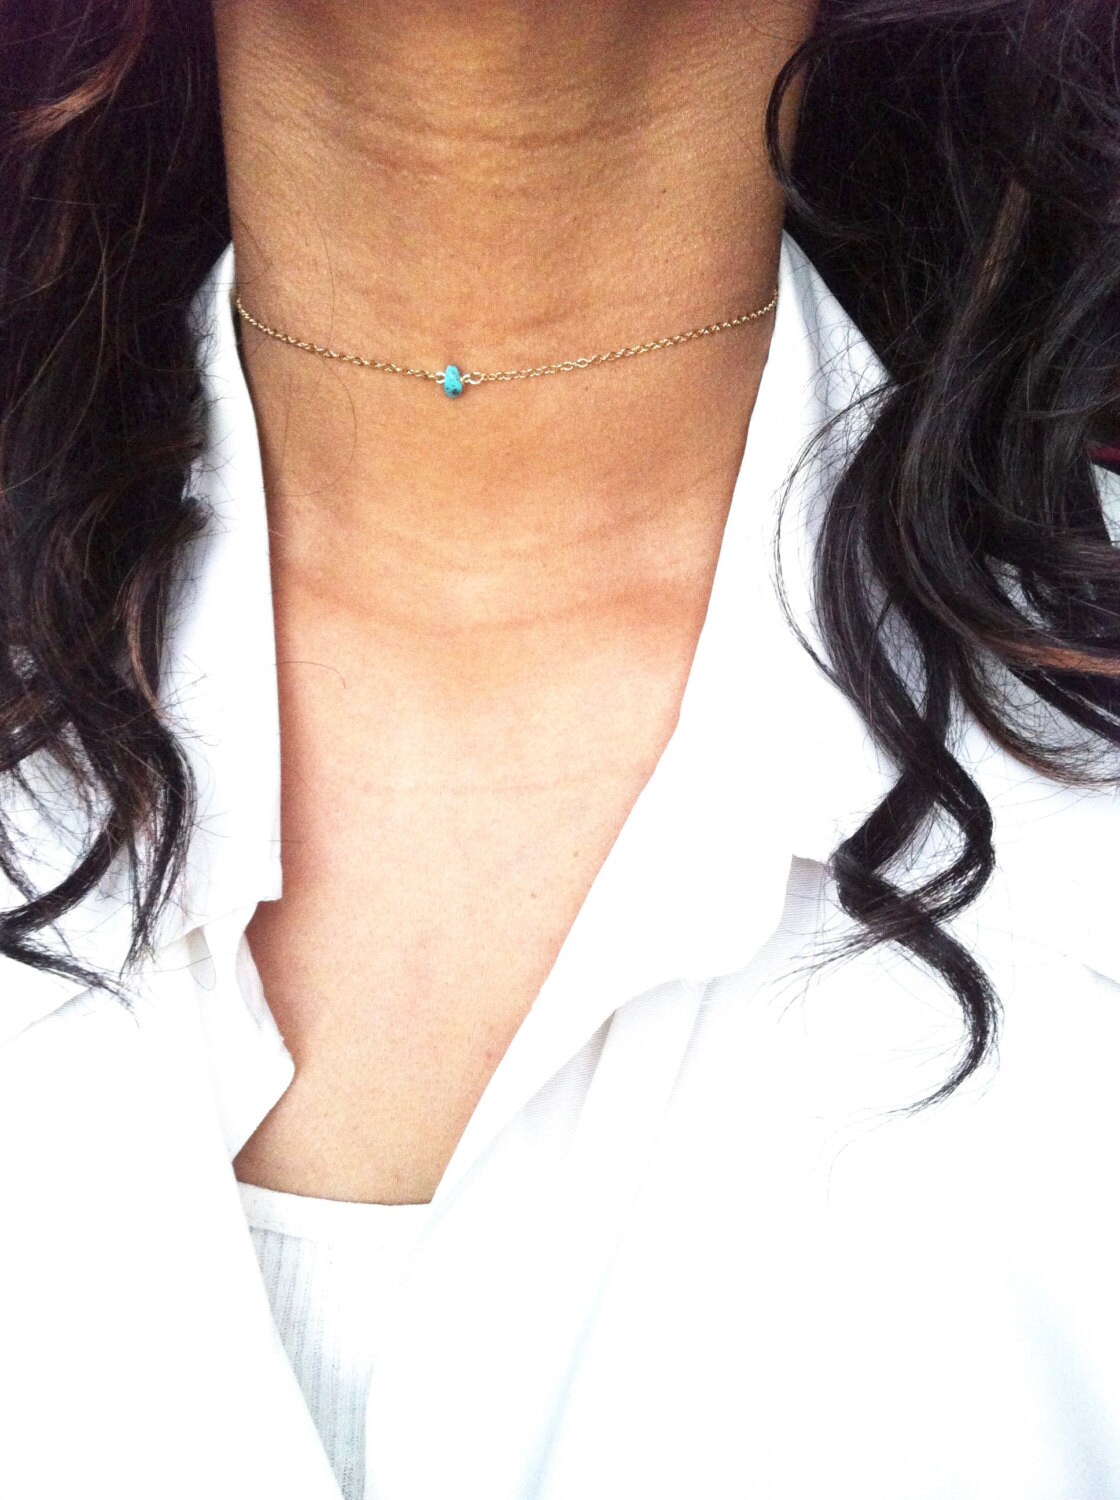 Simple Turquoise Choker Gold Choker Chain Tiny Turquoise Etsy